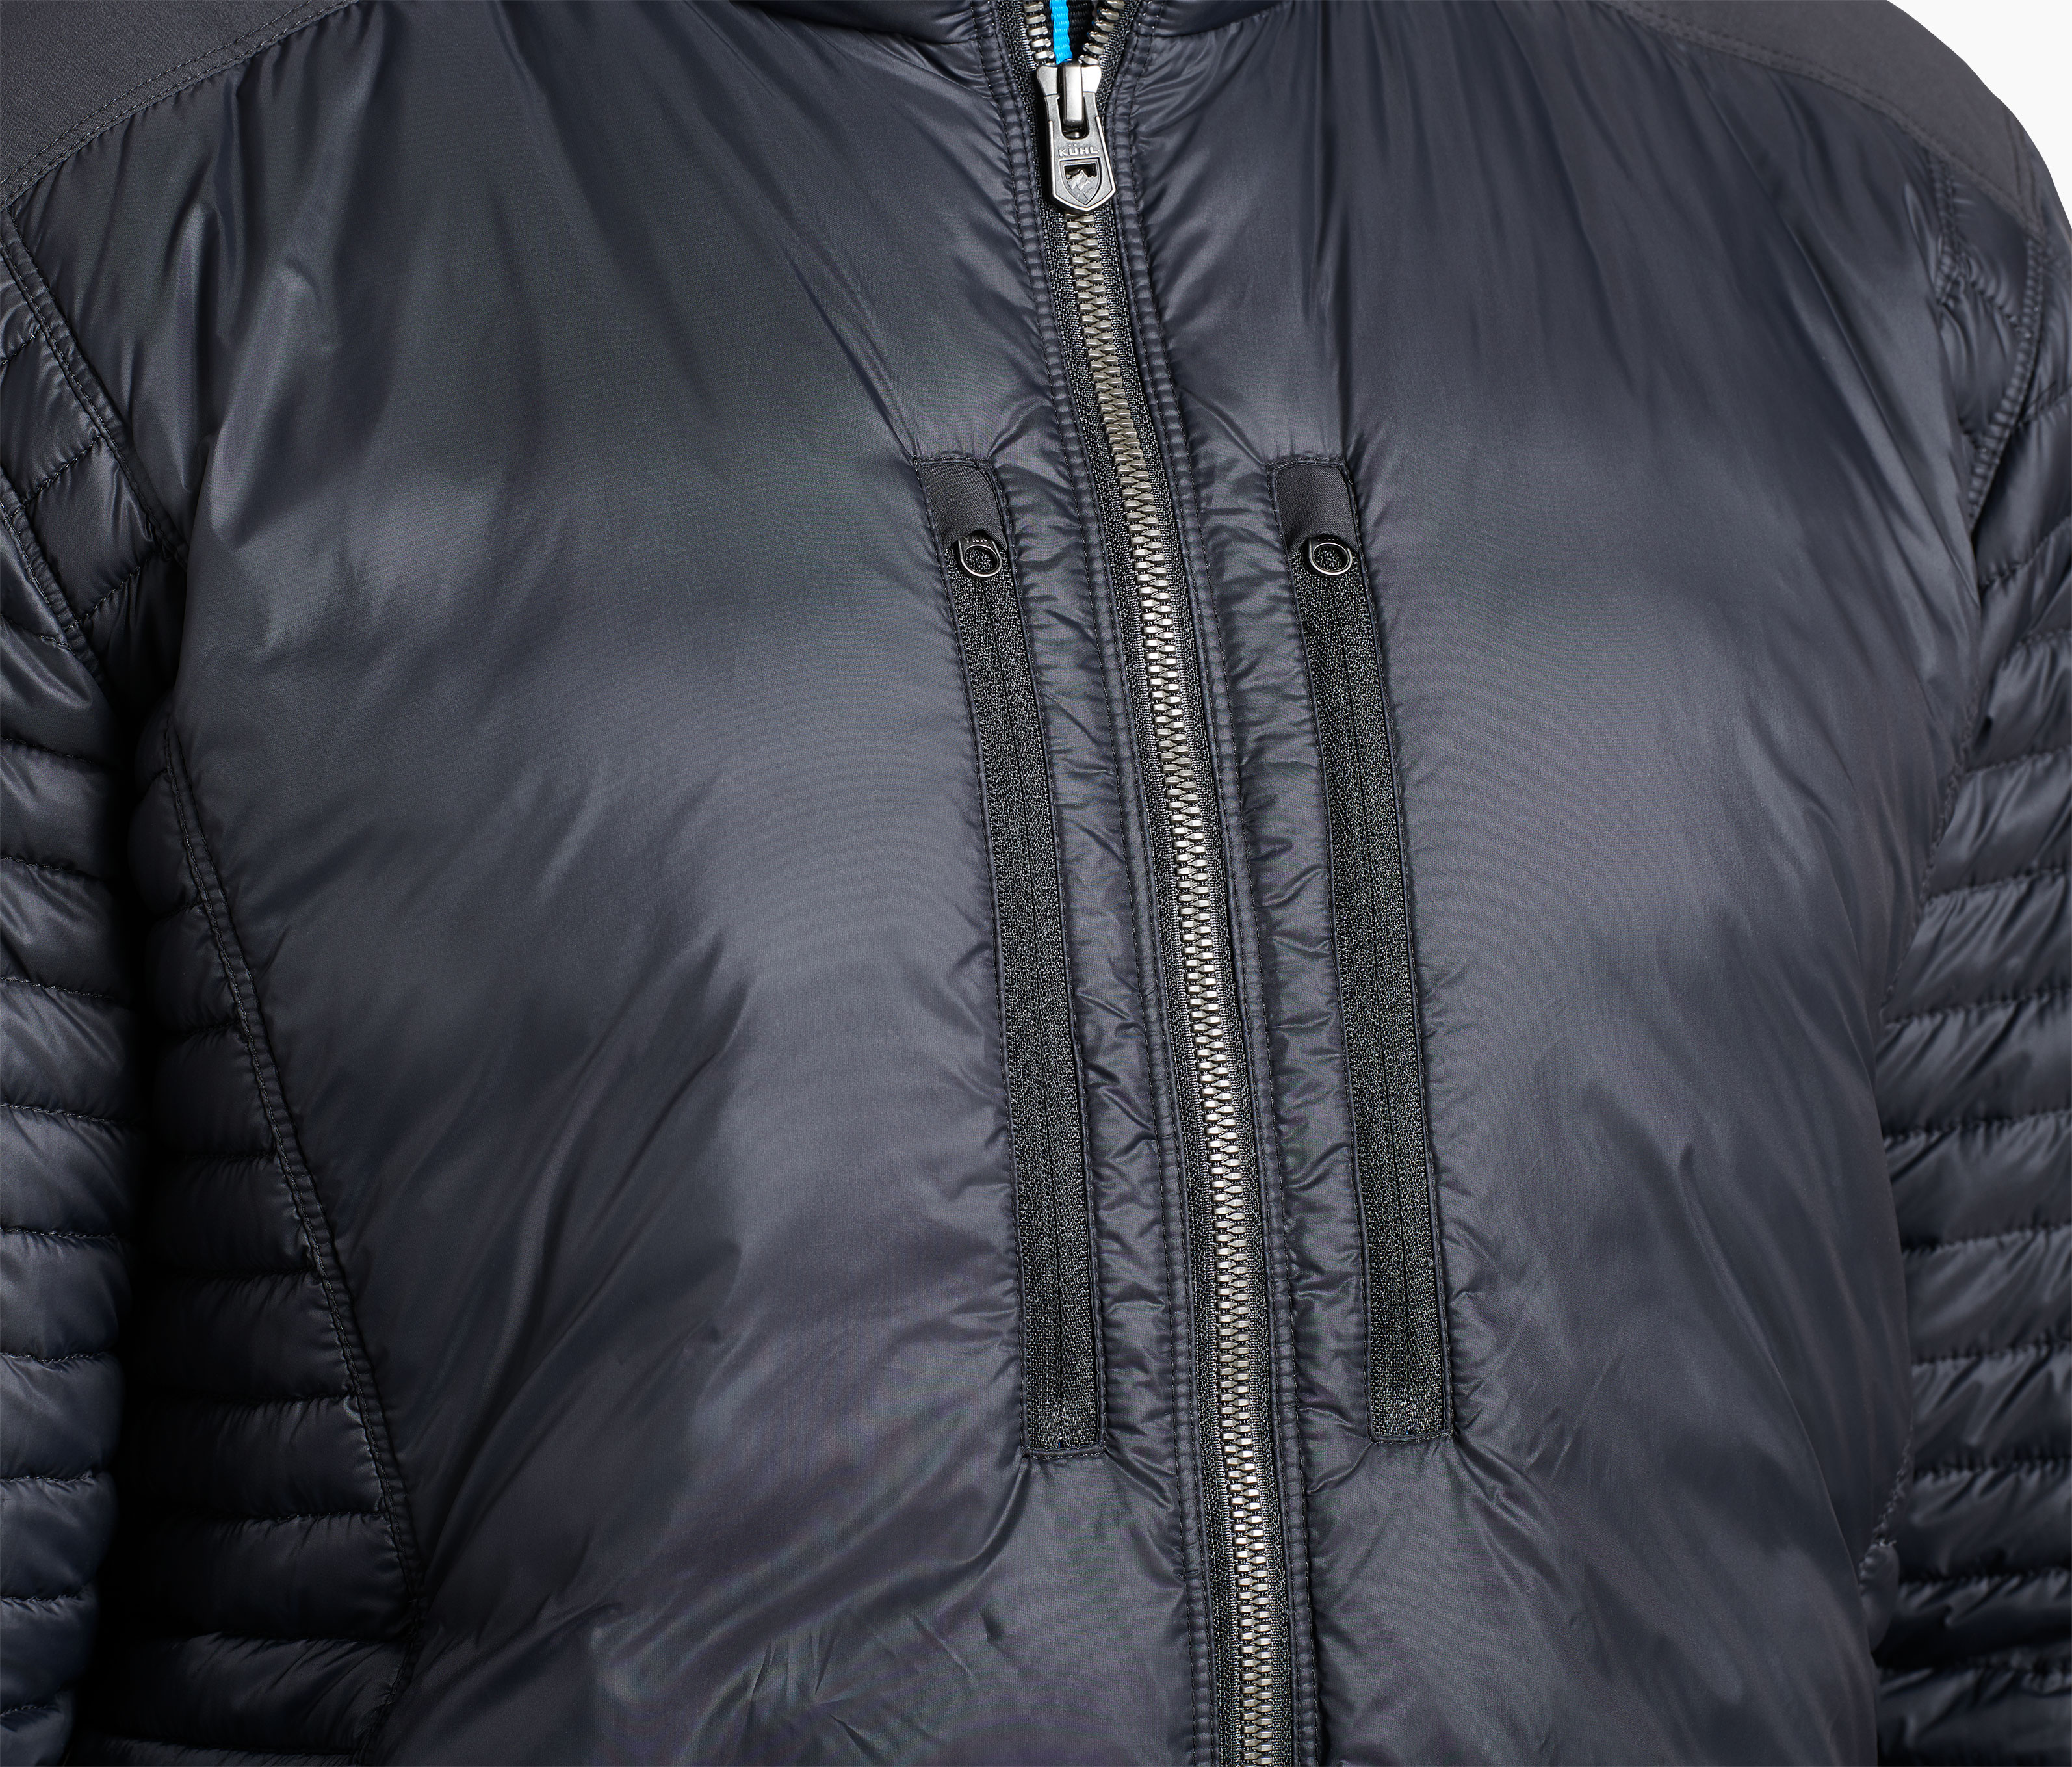 Spyfire Jacket by Kuhl – Adventure Outfitters